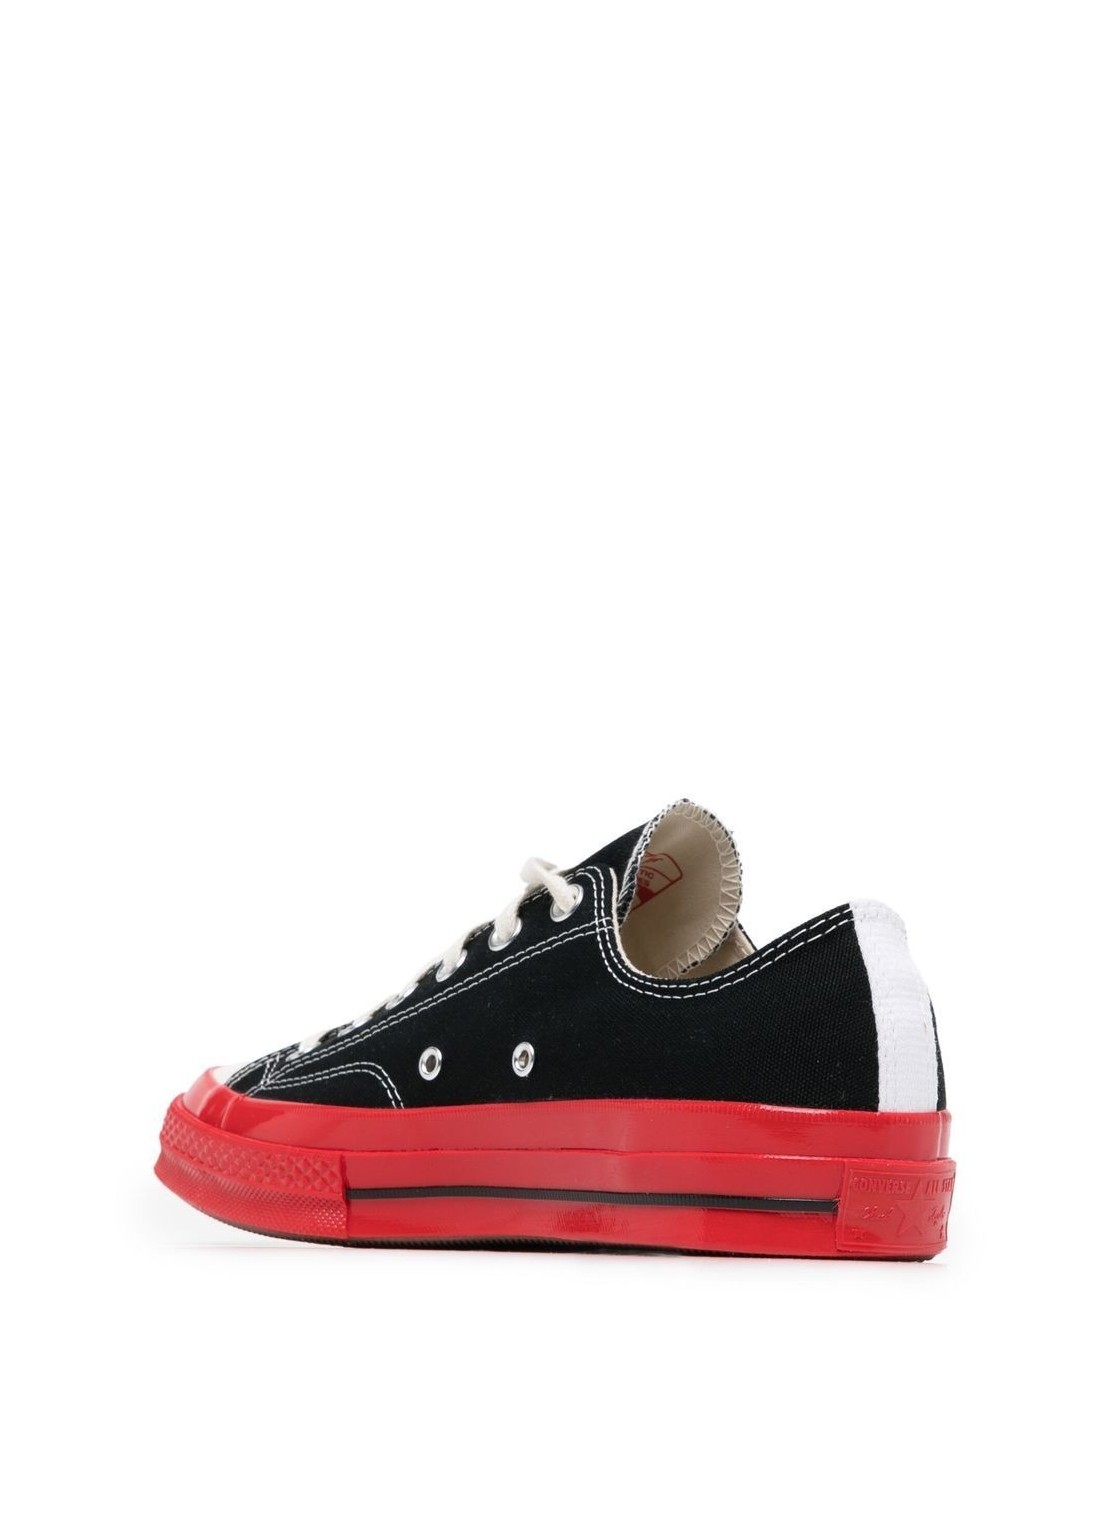 comme converse red sole low top - p1k123 black Talla 42